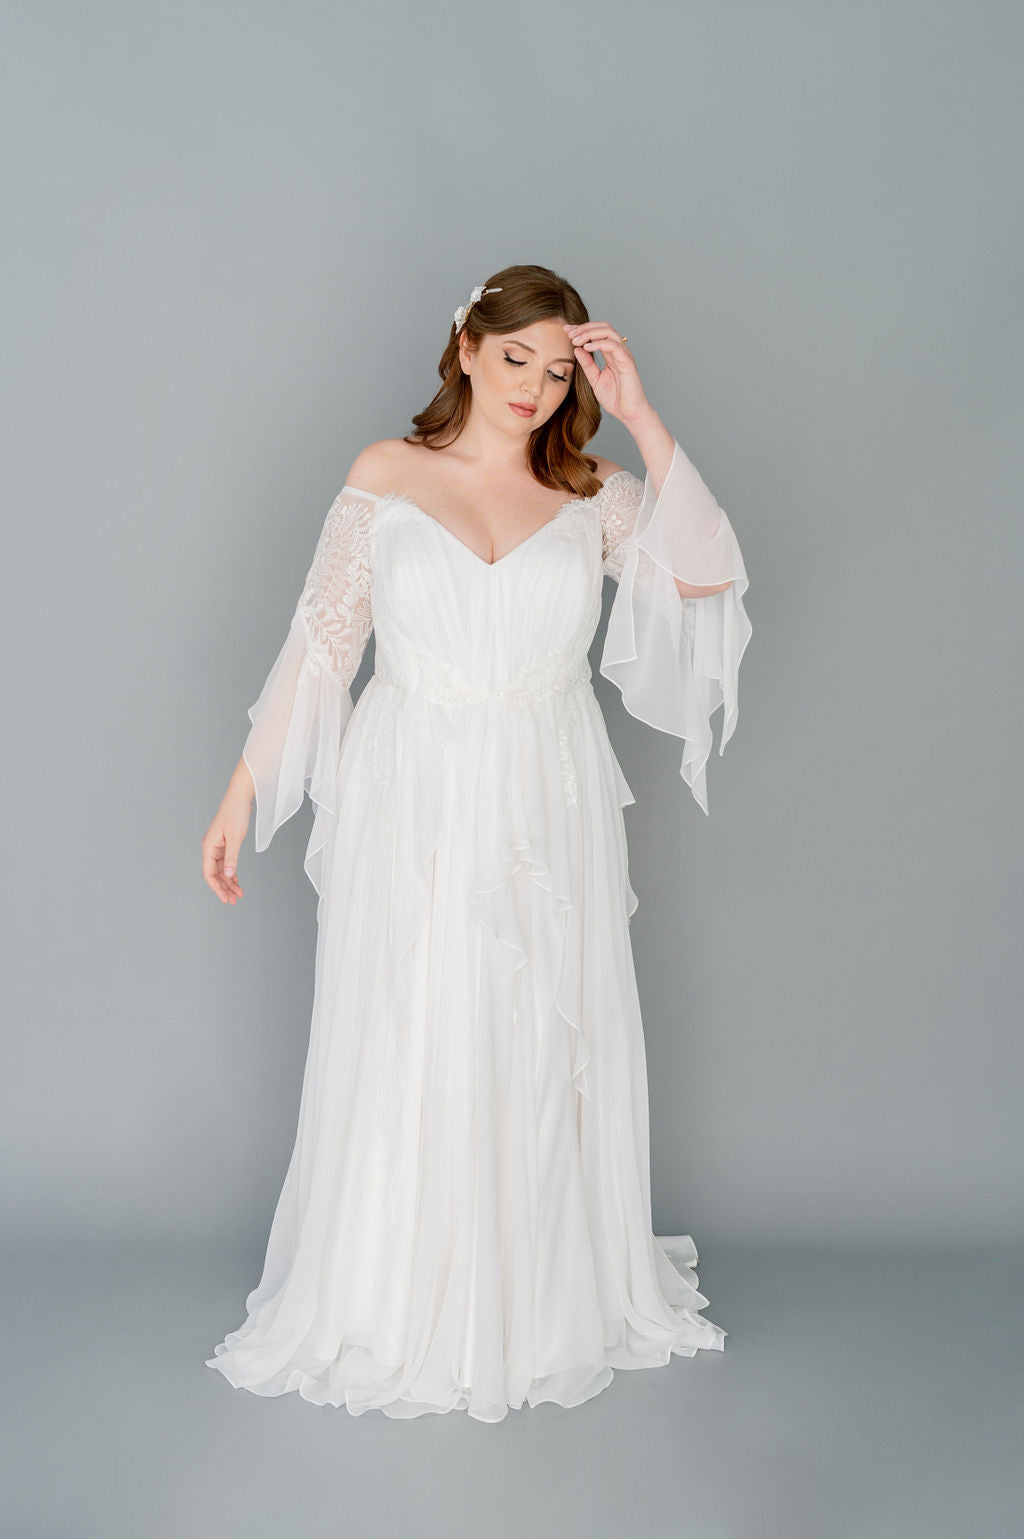 Romantic silk chiffon wedding dress by Catherine Langlois. Boho styling with a full gathered skirt and floaty details. Beaded leaf lace, 3/4 sleeves.